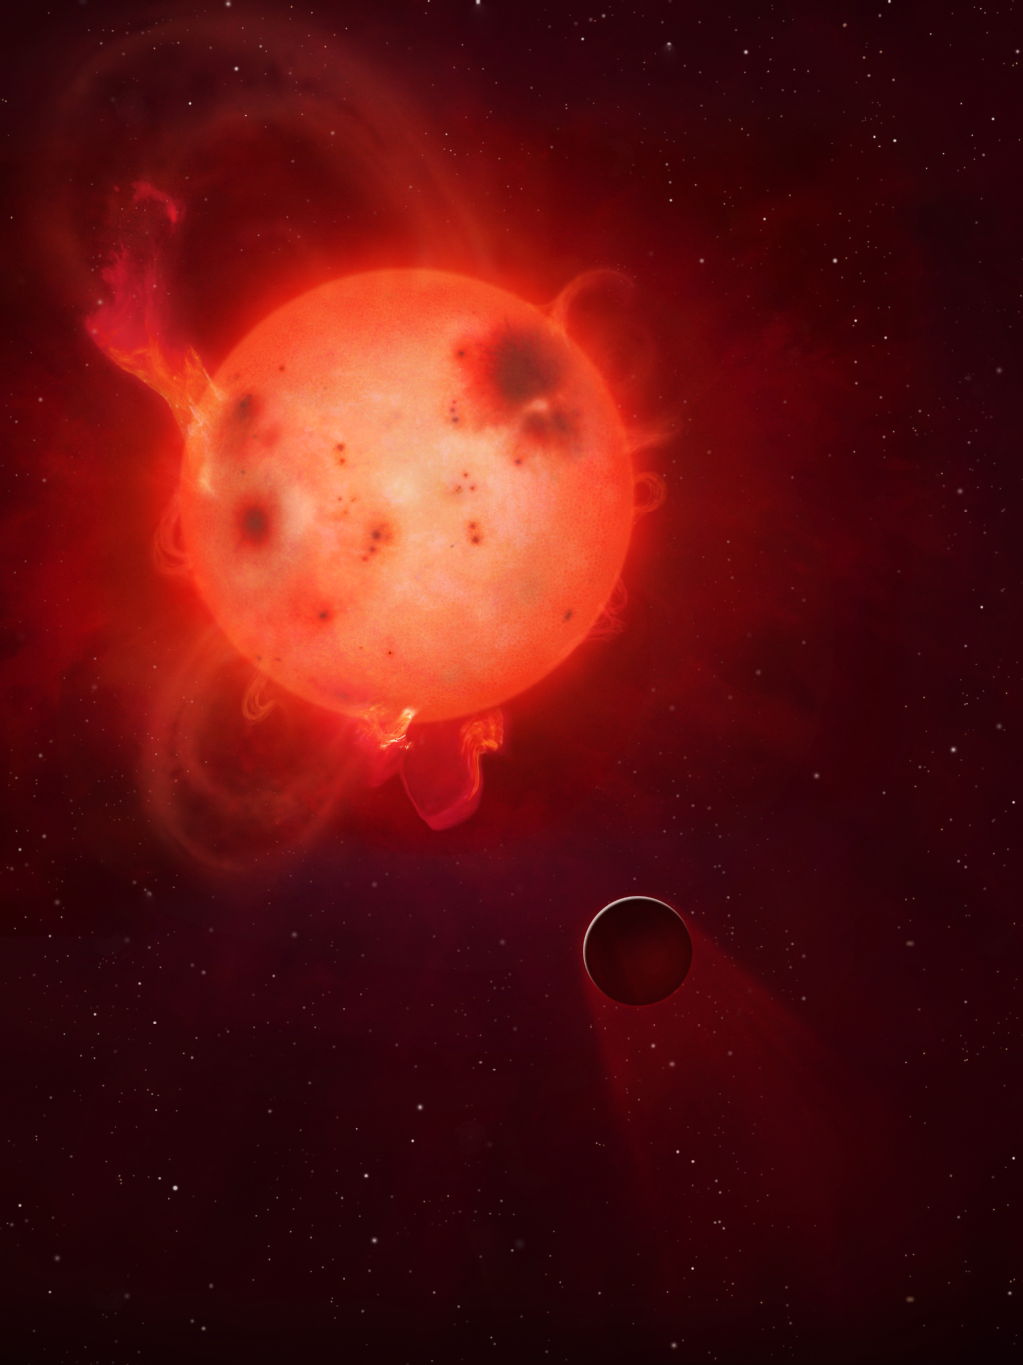 Image caption: Kepler-438b: The planet Kepler-438b is shown here in front of its violent parent star. It is regularly irradiated by huge flares of radiation, which could render the planet uninhabitable. Here the planet’s atmosphere is shown being stripped away.